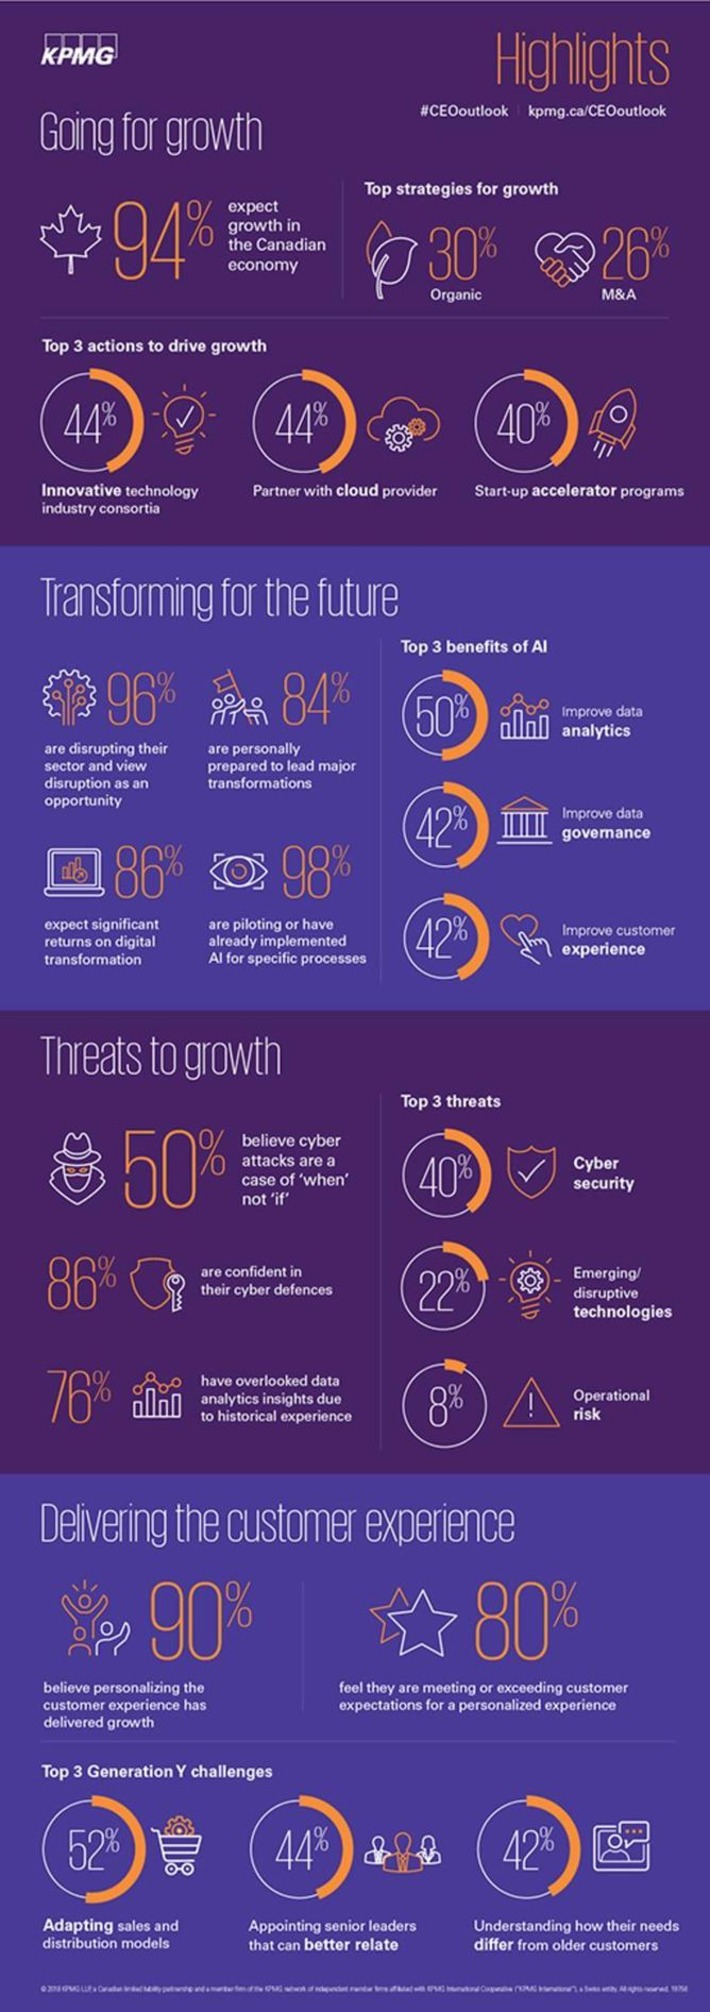 Canadian CEO Outlook - confidence and growing pains with digital at the center of future growth @KPMG | WHY IT MATTERS: Digital Transformation | Scoop.it